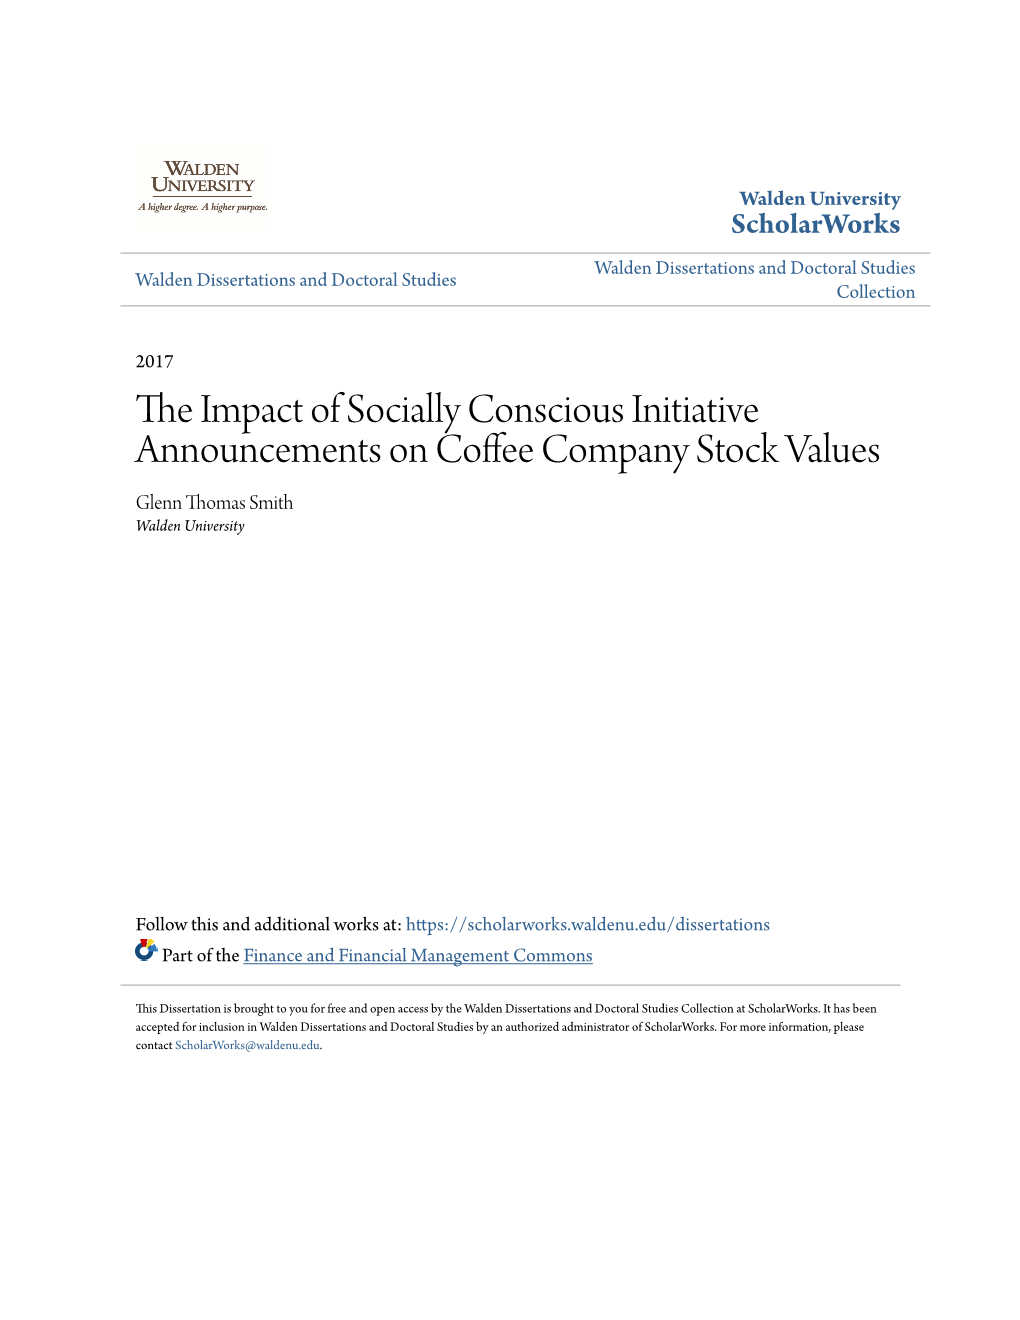 The Impact of Socially Conscious Initiative Announcements on Coffee Company Stock